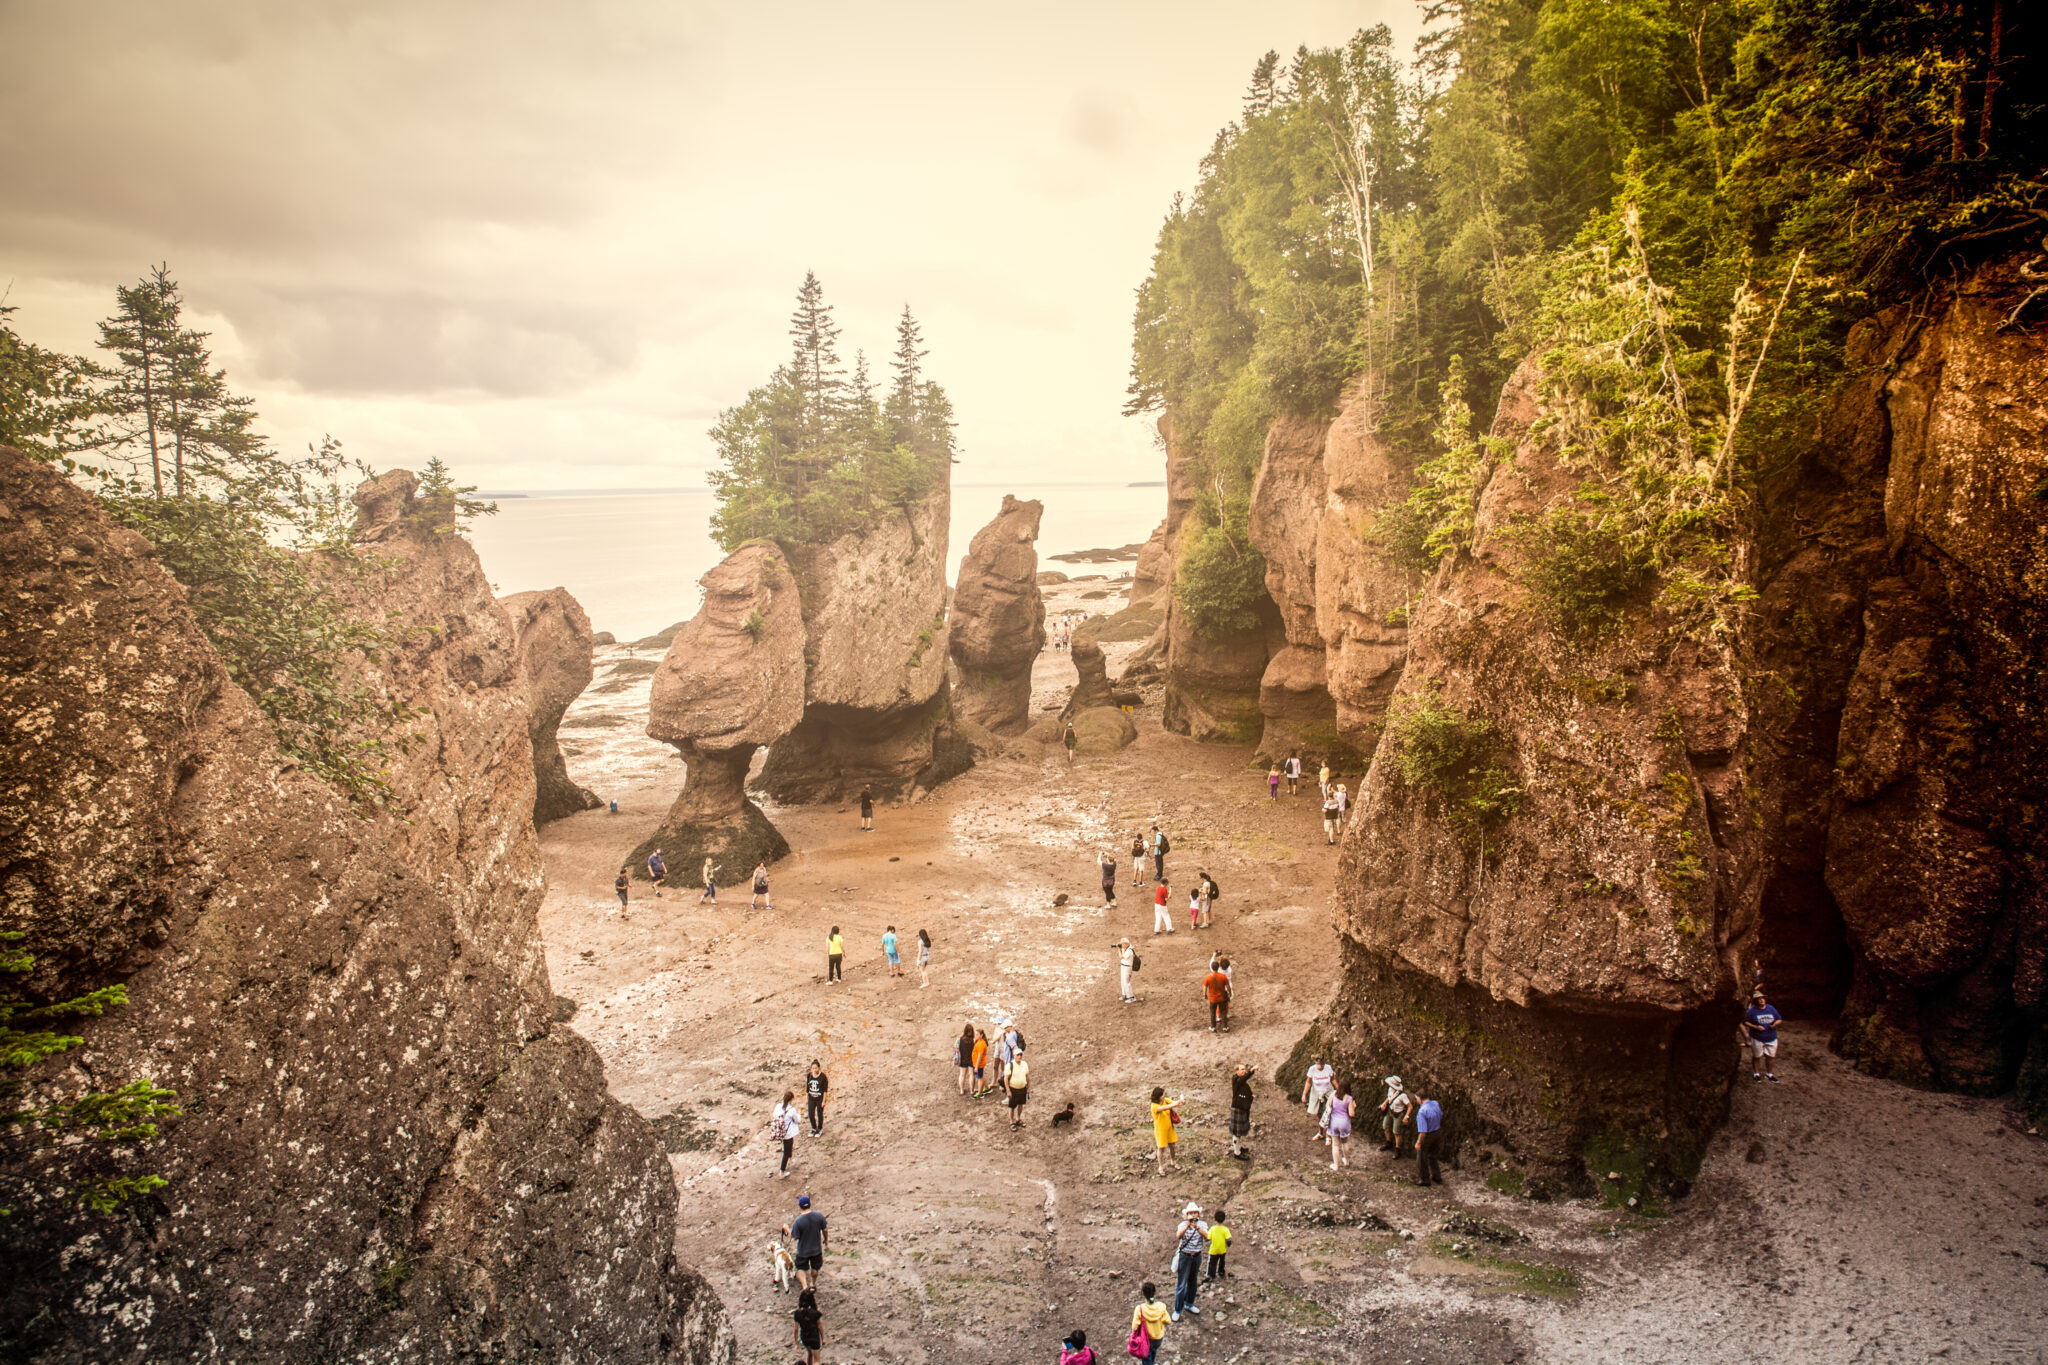 In Hopewell Cape, New Brunswick Canada, people walking on the Atlantic ocean floor at low tide. Hopewell Rocks, also known as Flowerpots, are rock formation seen at low tide. When the tide is high, they simply go back to being low islands.